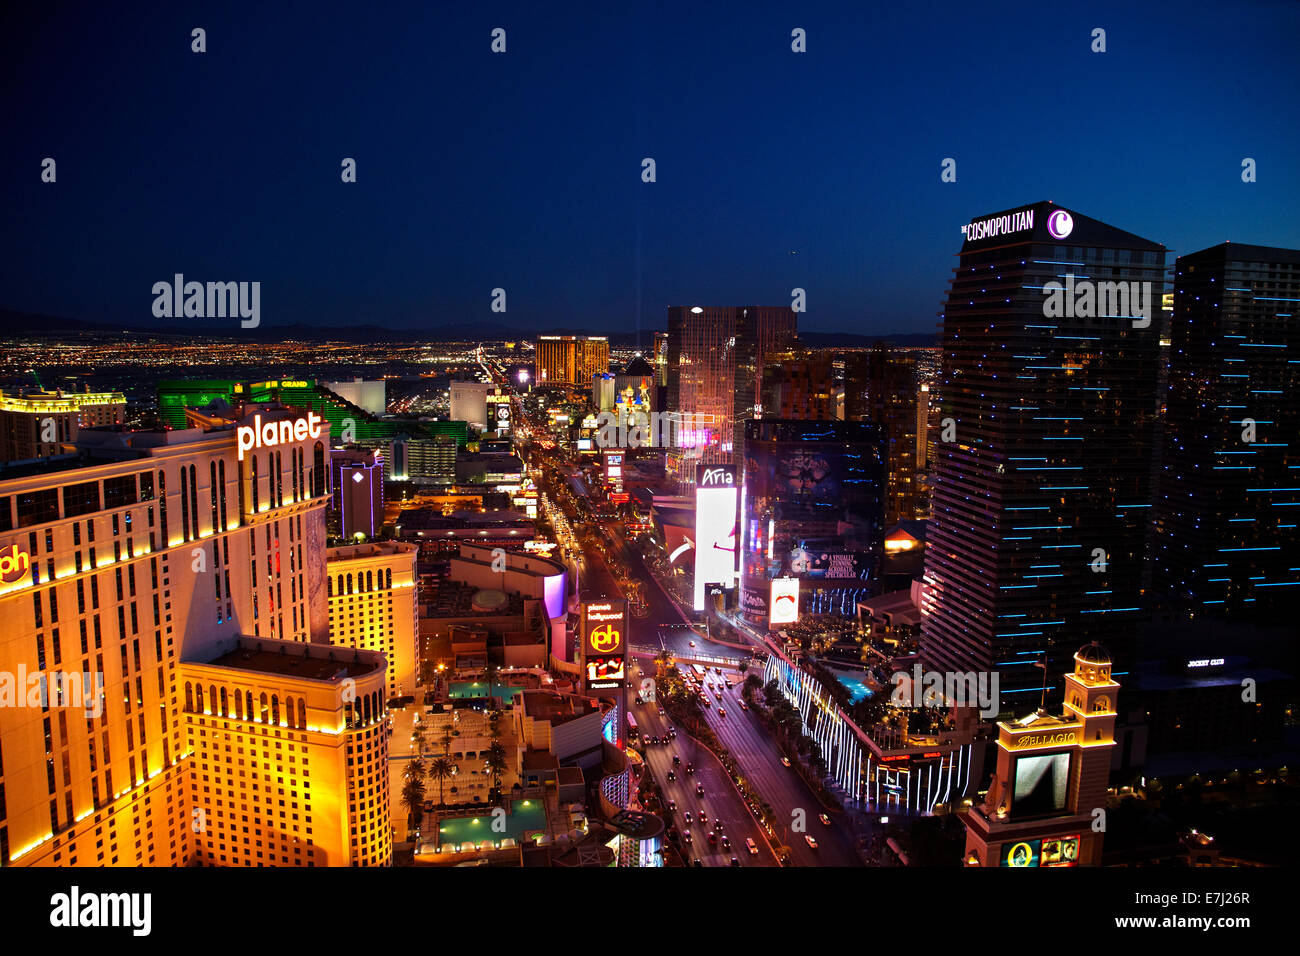 Planet Hollywood and casinos and hotels along The Strip, seen from Eiffel Tower replica at Paris Hotel and Casino, Las Vegas, Ne Stock Photo